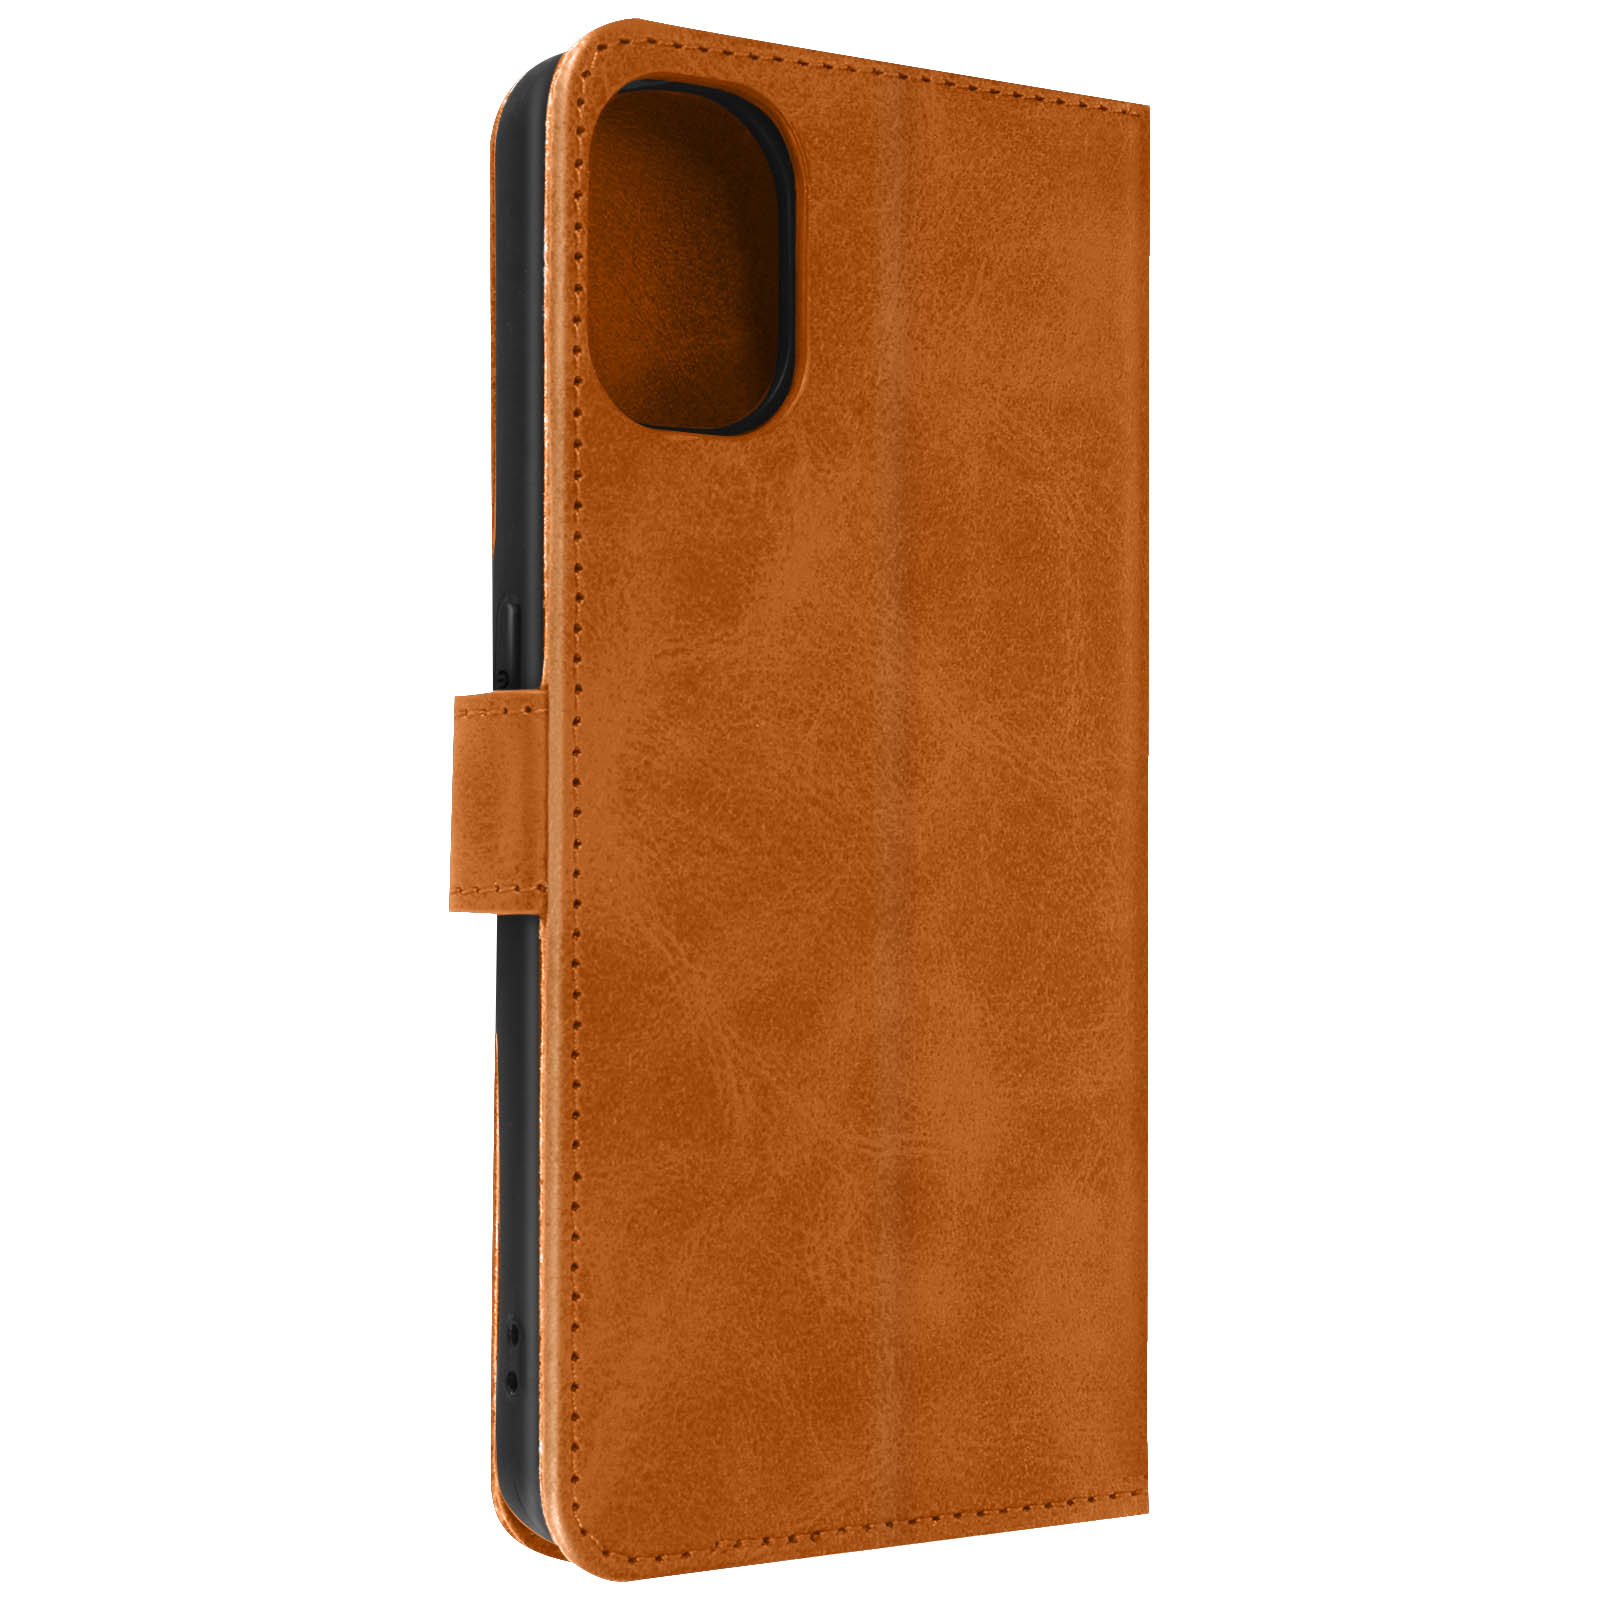 AVIZAR Bookstyle Series, Phone Bookcover, Camel 1, Nothing